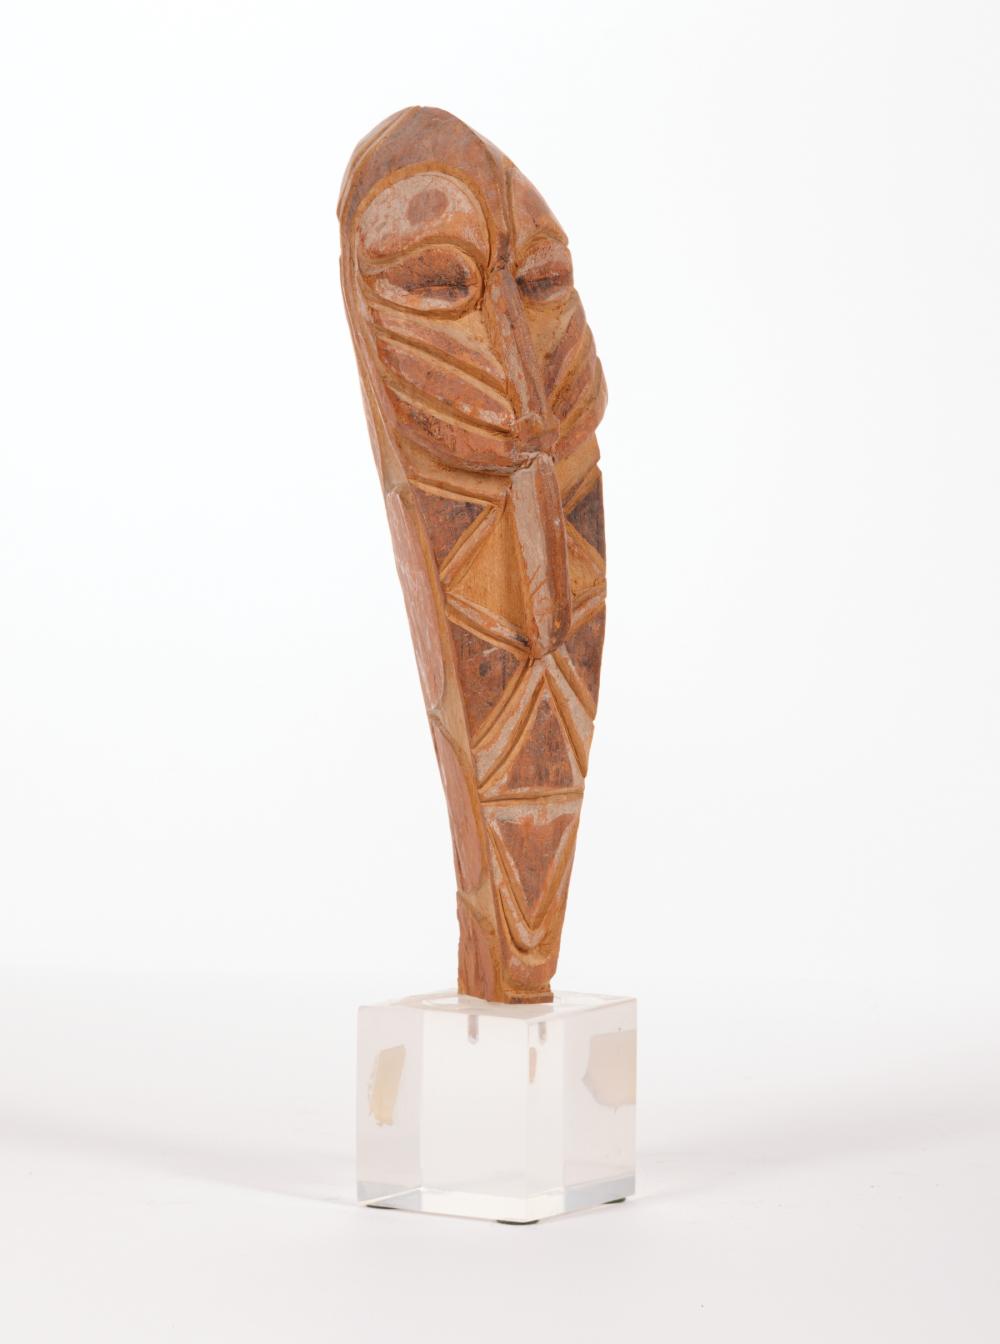 OCEANIC CARVED WOOD HEADOceanic Carved